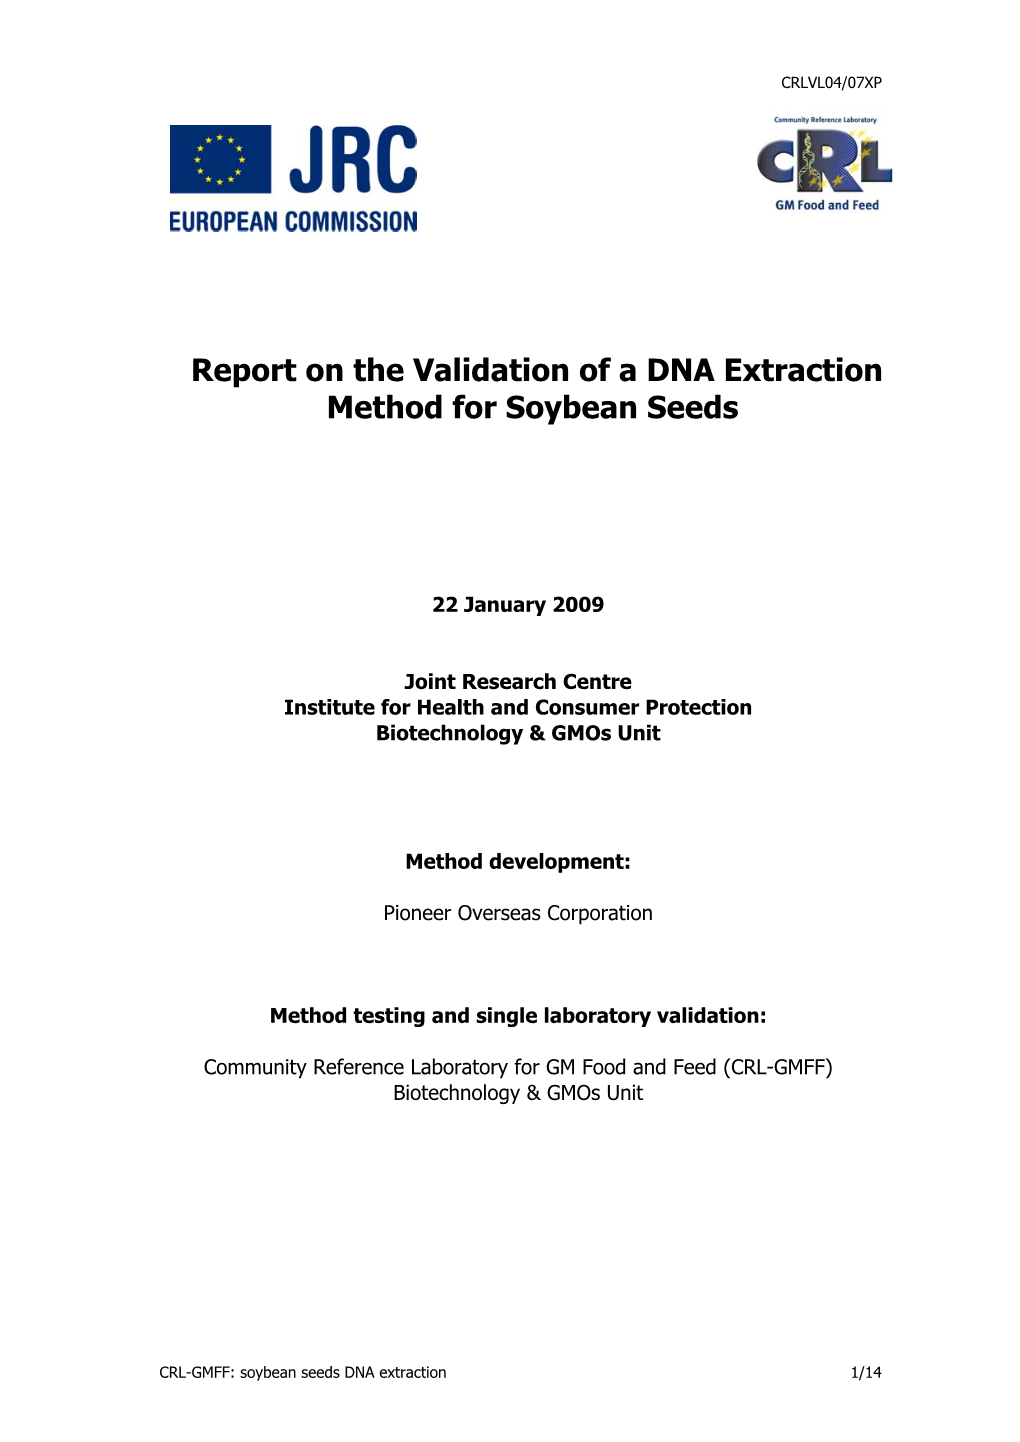 Report on the Validation of a DNA Extraction Method for Soybean Seeds